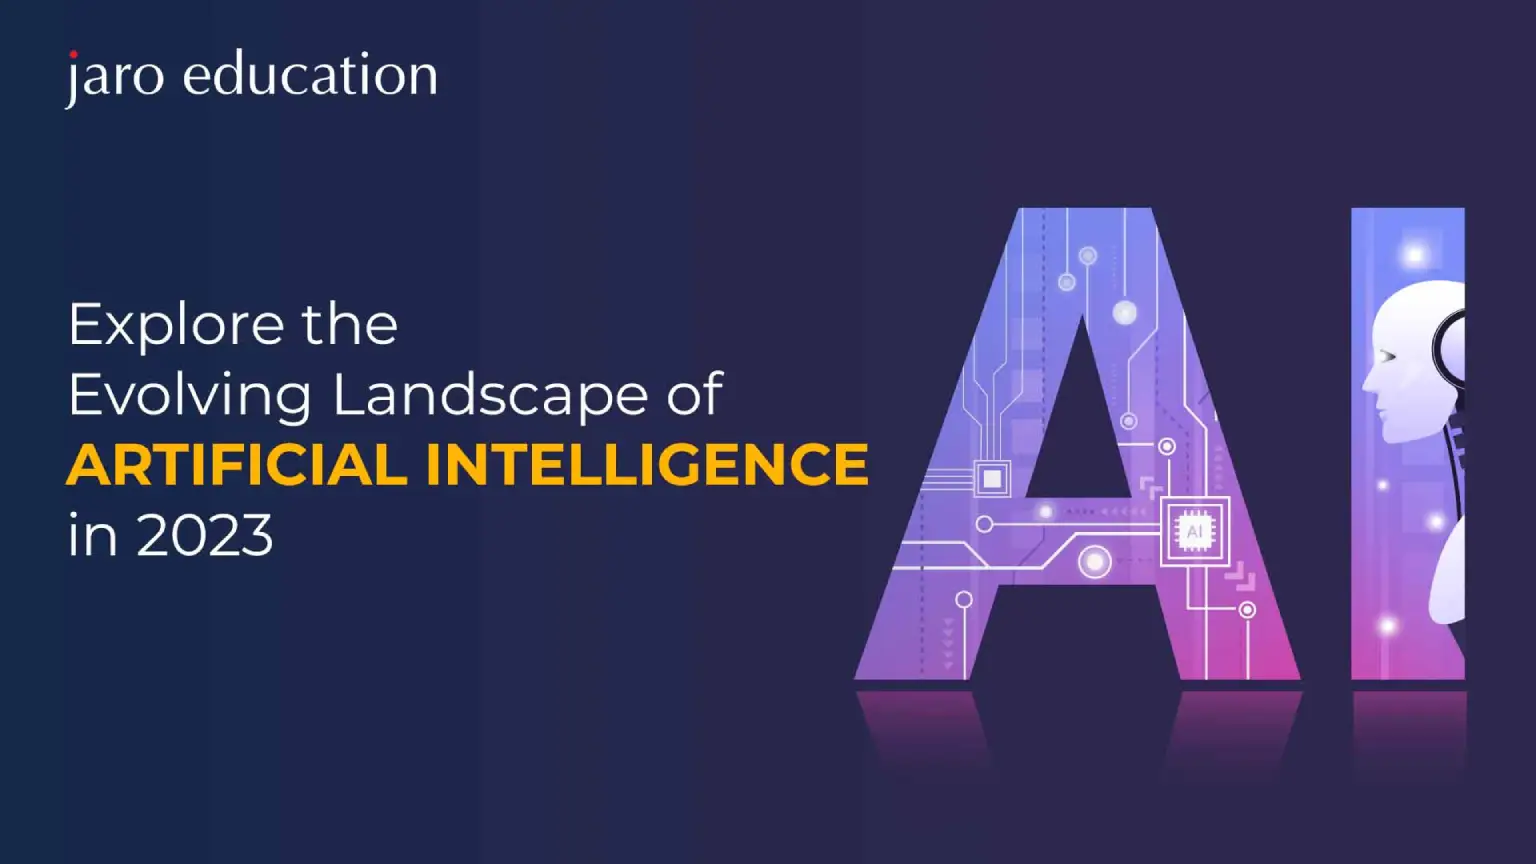 Explore the Evolving Landscape of Artificial Intelligence in 2023